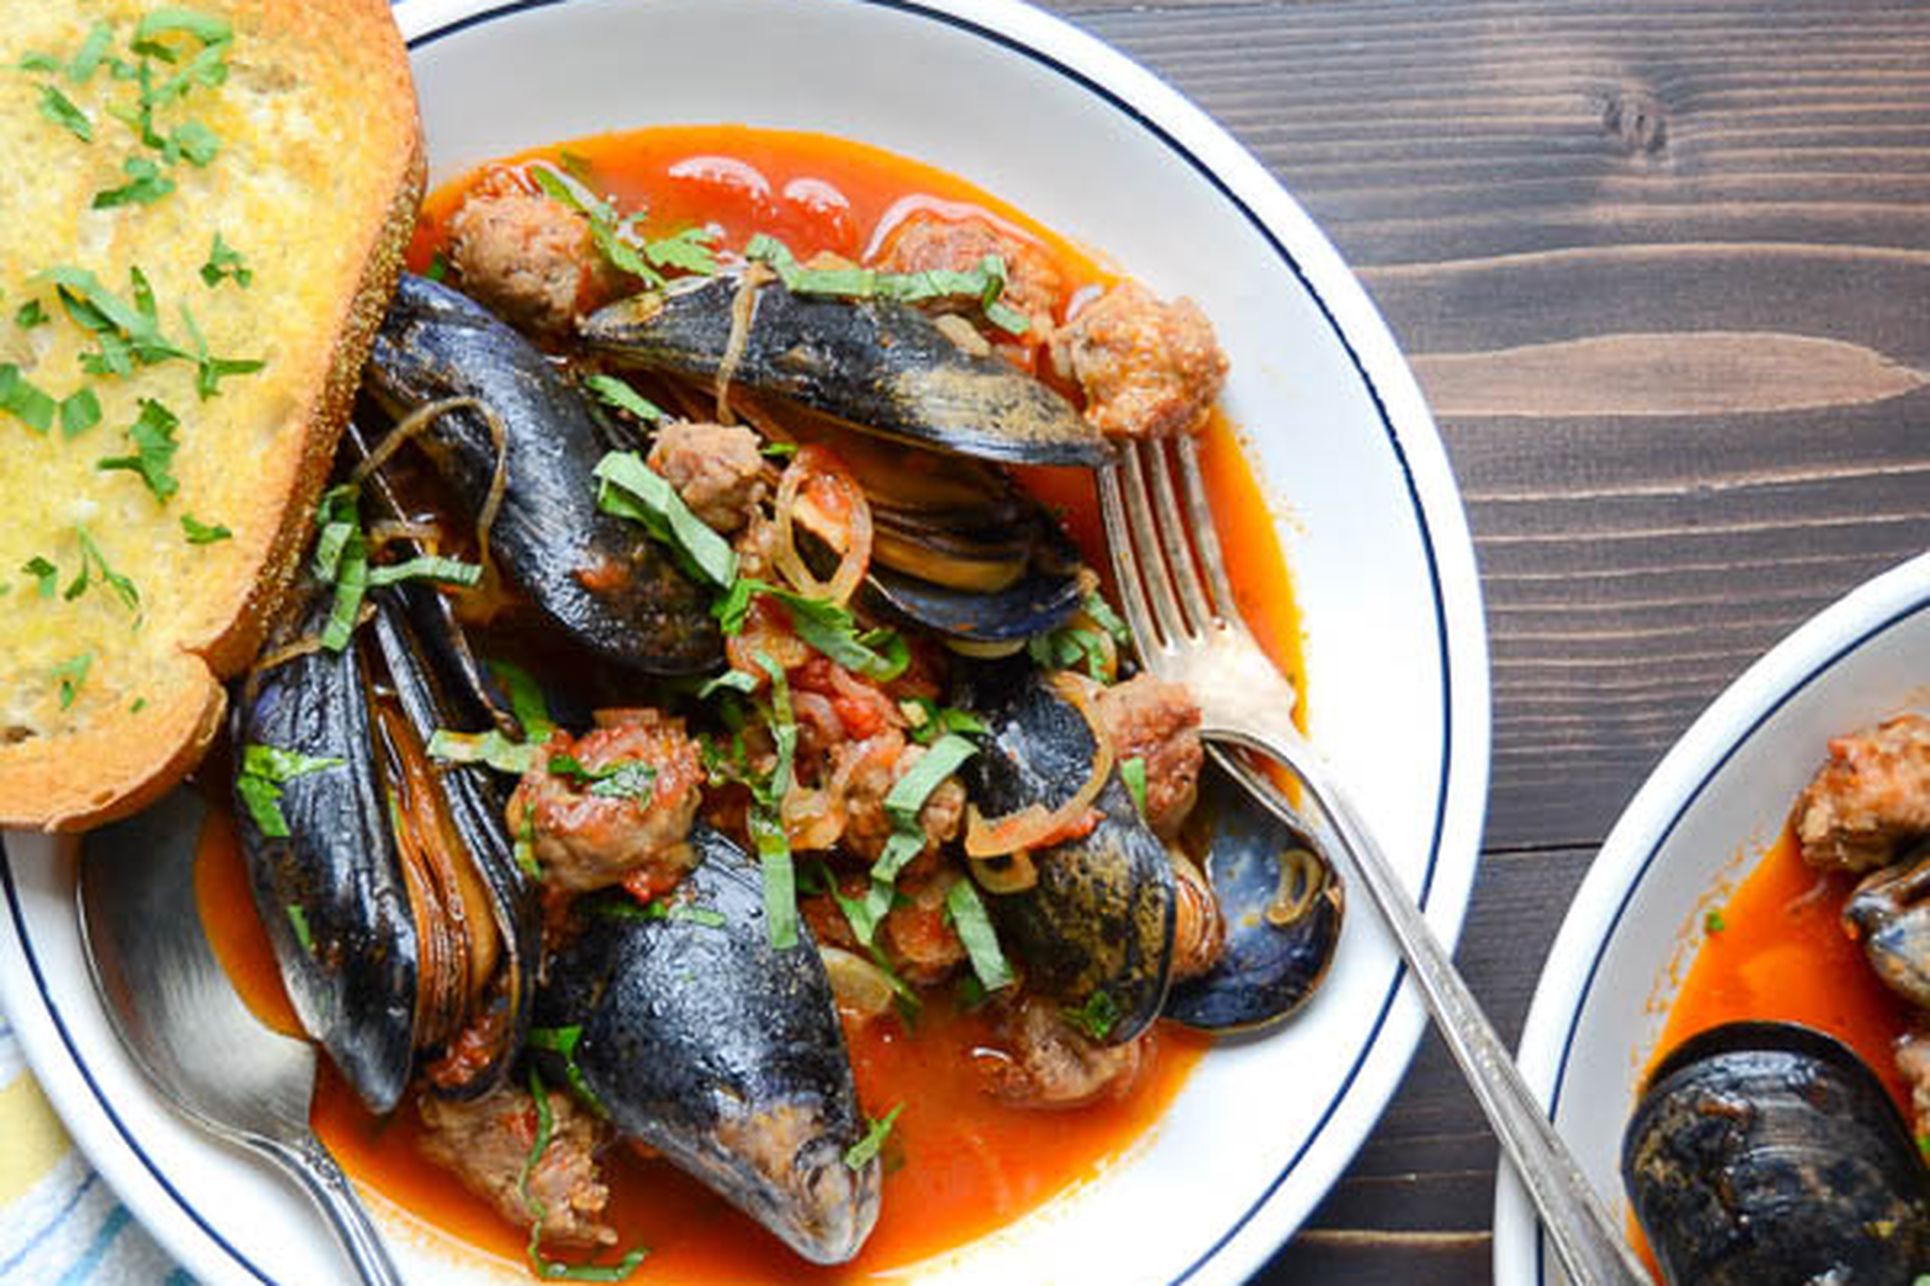 79648219 aaec 4ac6 ba36 d9514ad20771 mussels and sausage 3 copy